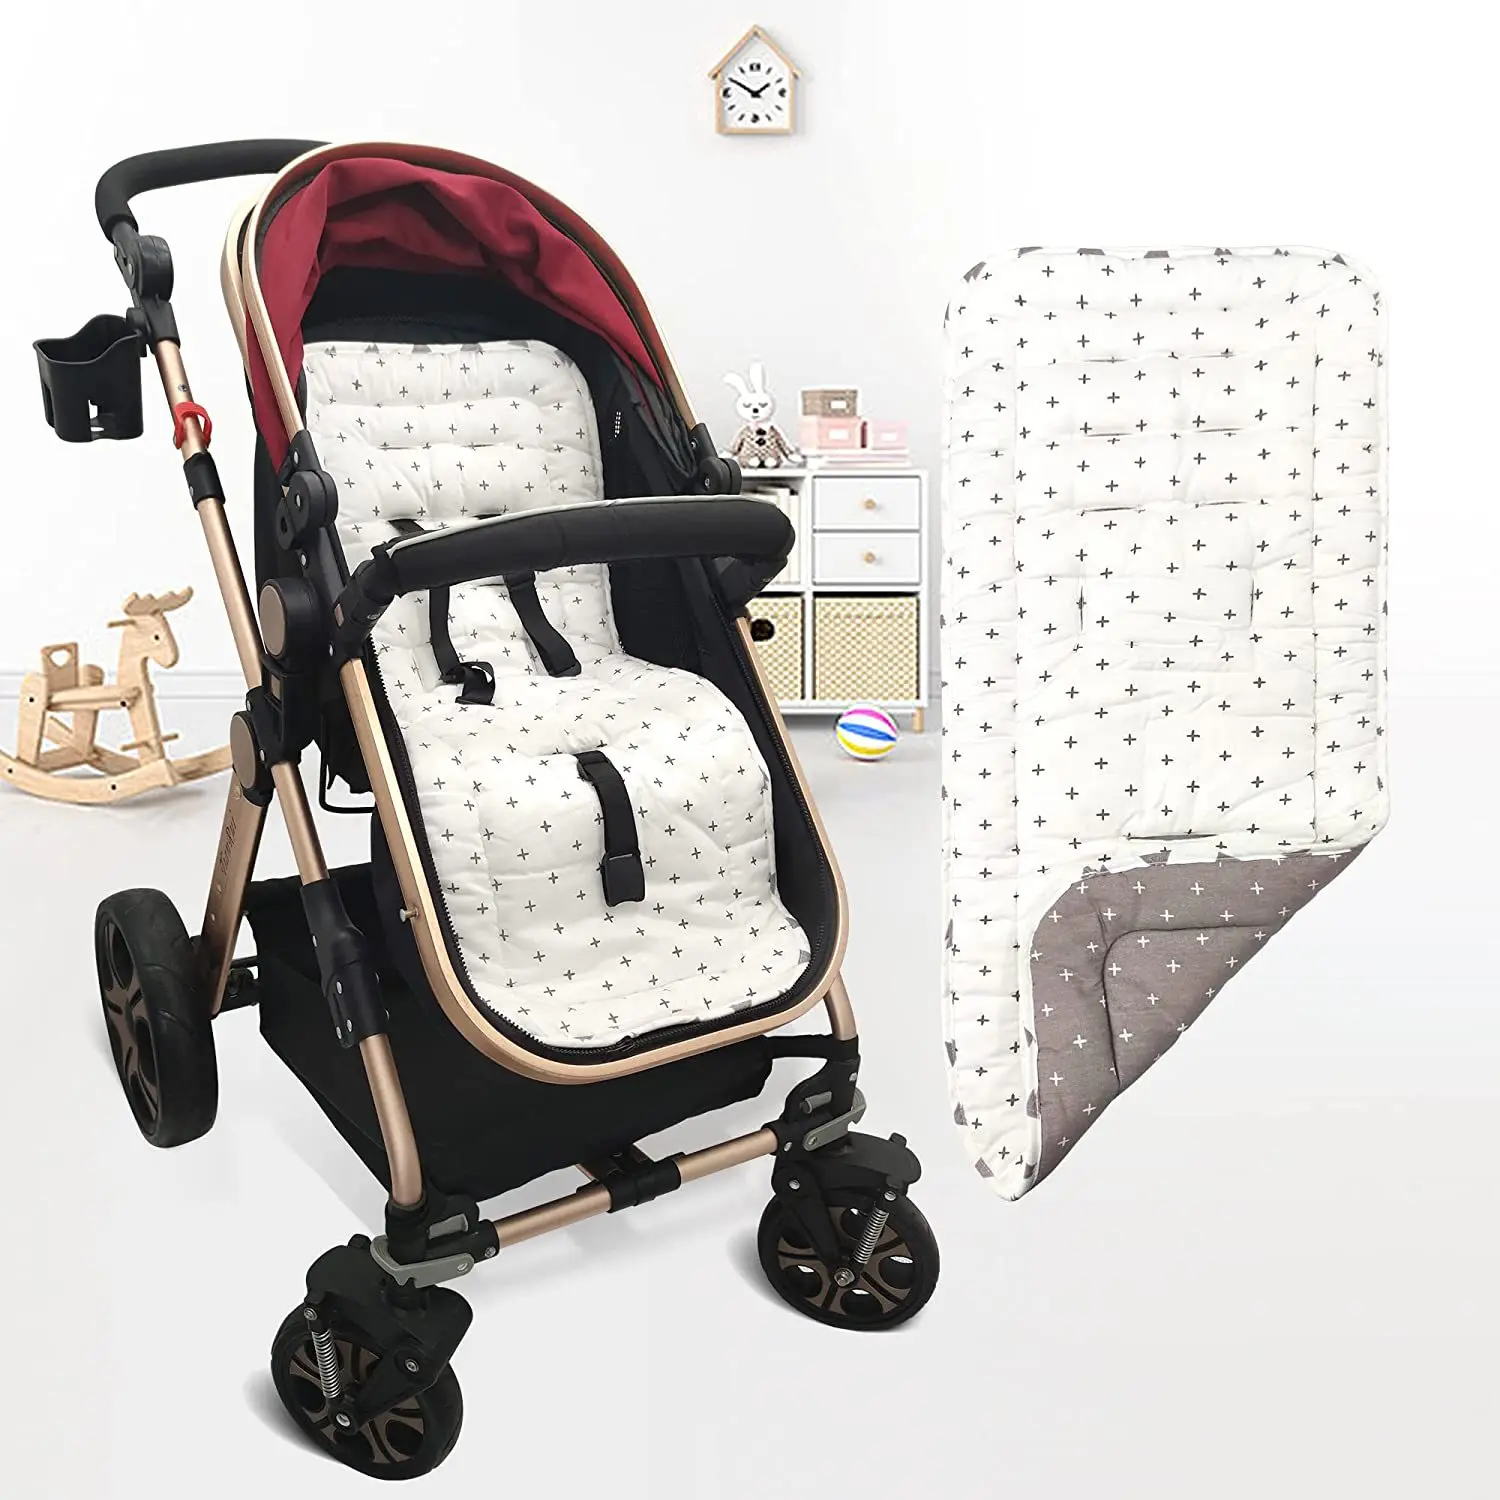 Baby Stroller Pad Cotton Four Seasons Cushion Stroller Accessories High View Car Baby Walking Baby Stroller Sleeping Pad